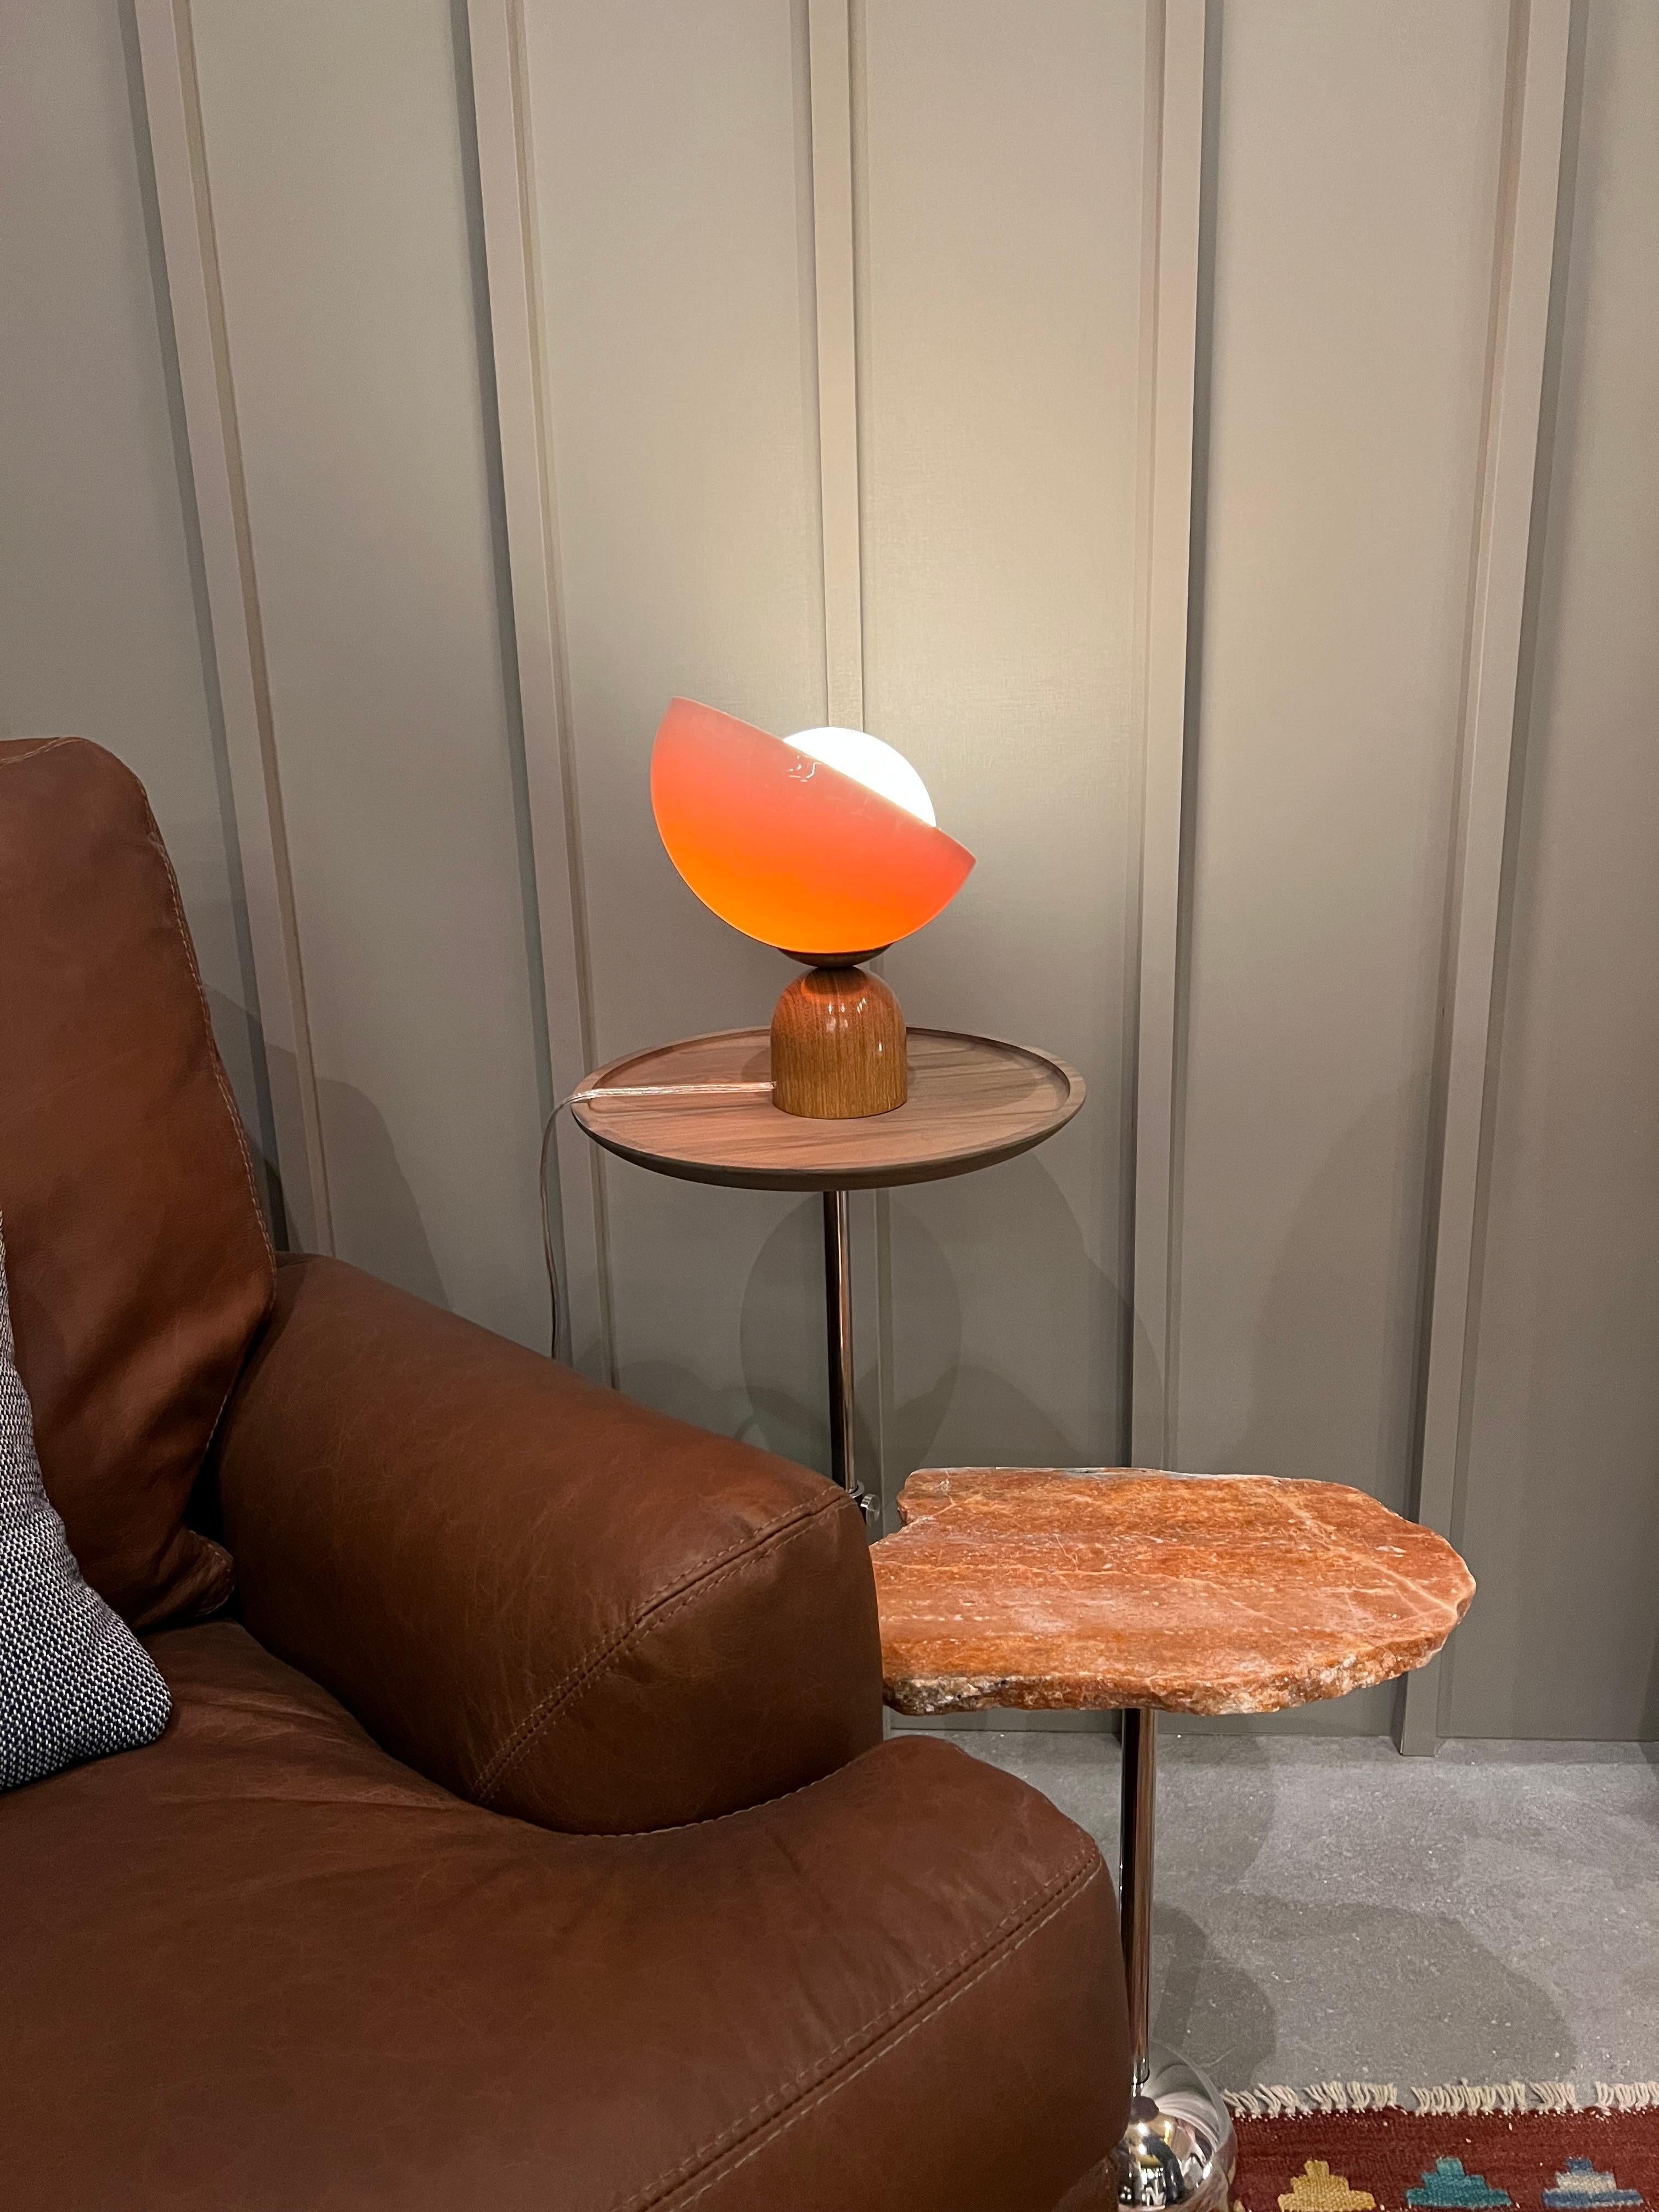 This table lamp is named Lichia. 
The product consists of a round acrylic diffuser and a wooden base.
The base is made of wood, shaped in a rounded design and with a varnish finishing, which gives the piece a shiny aspect.
The diffuser is made of